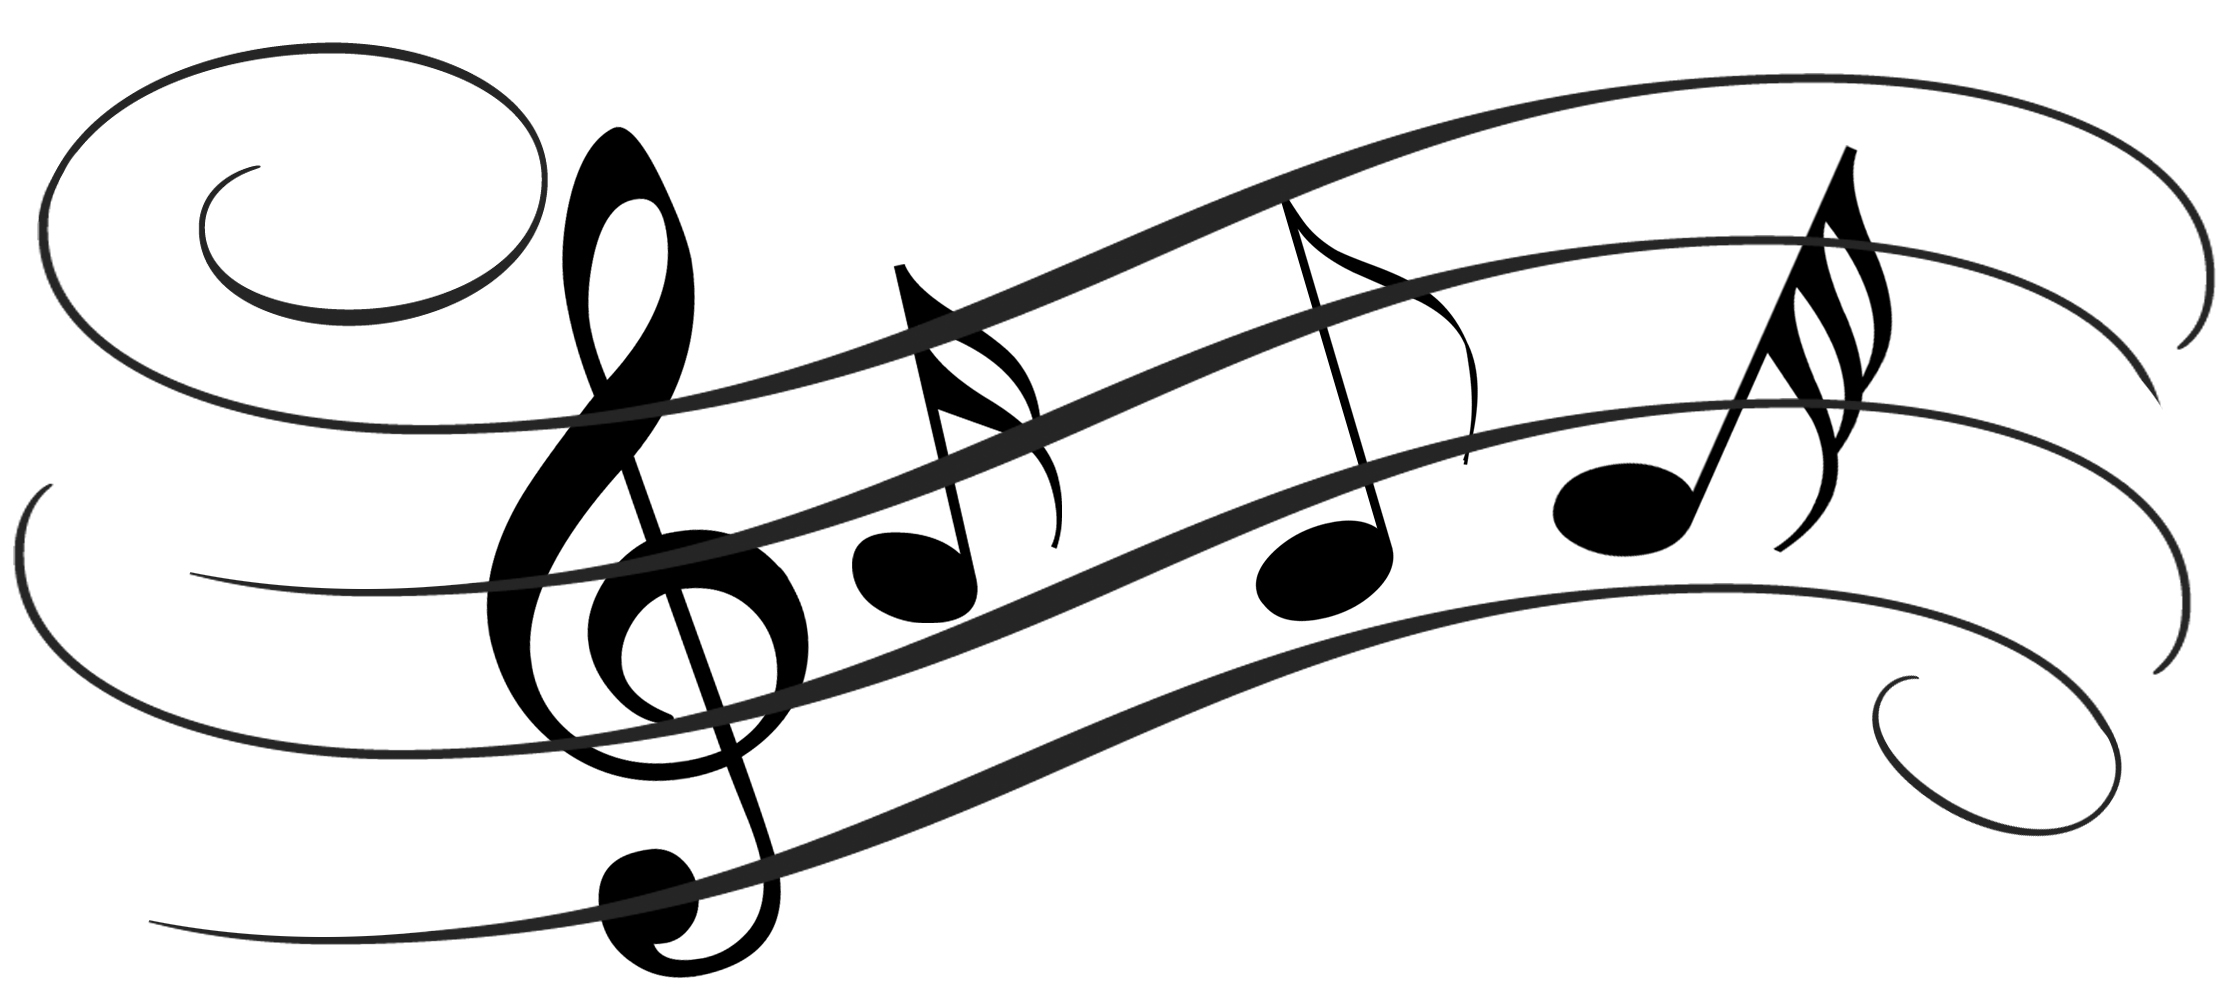 Musical Notes Music Notes Symbols Images Clipart